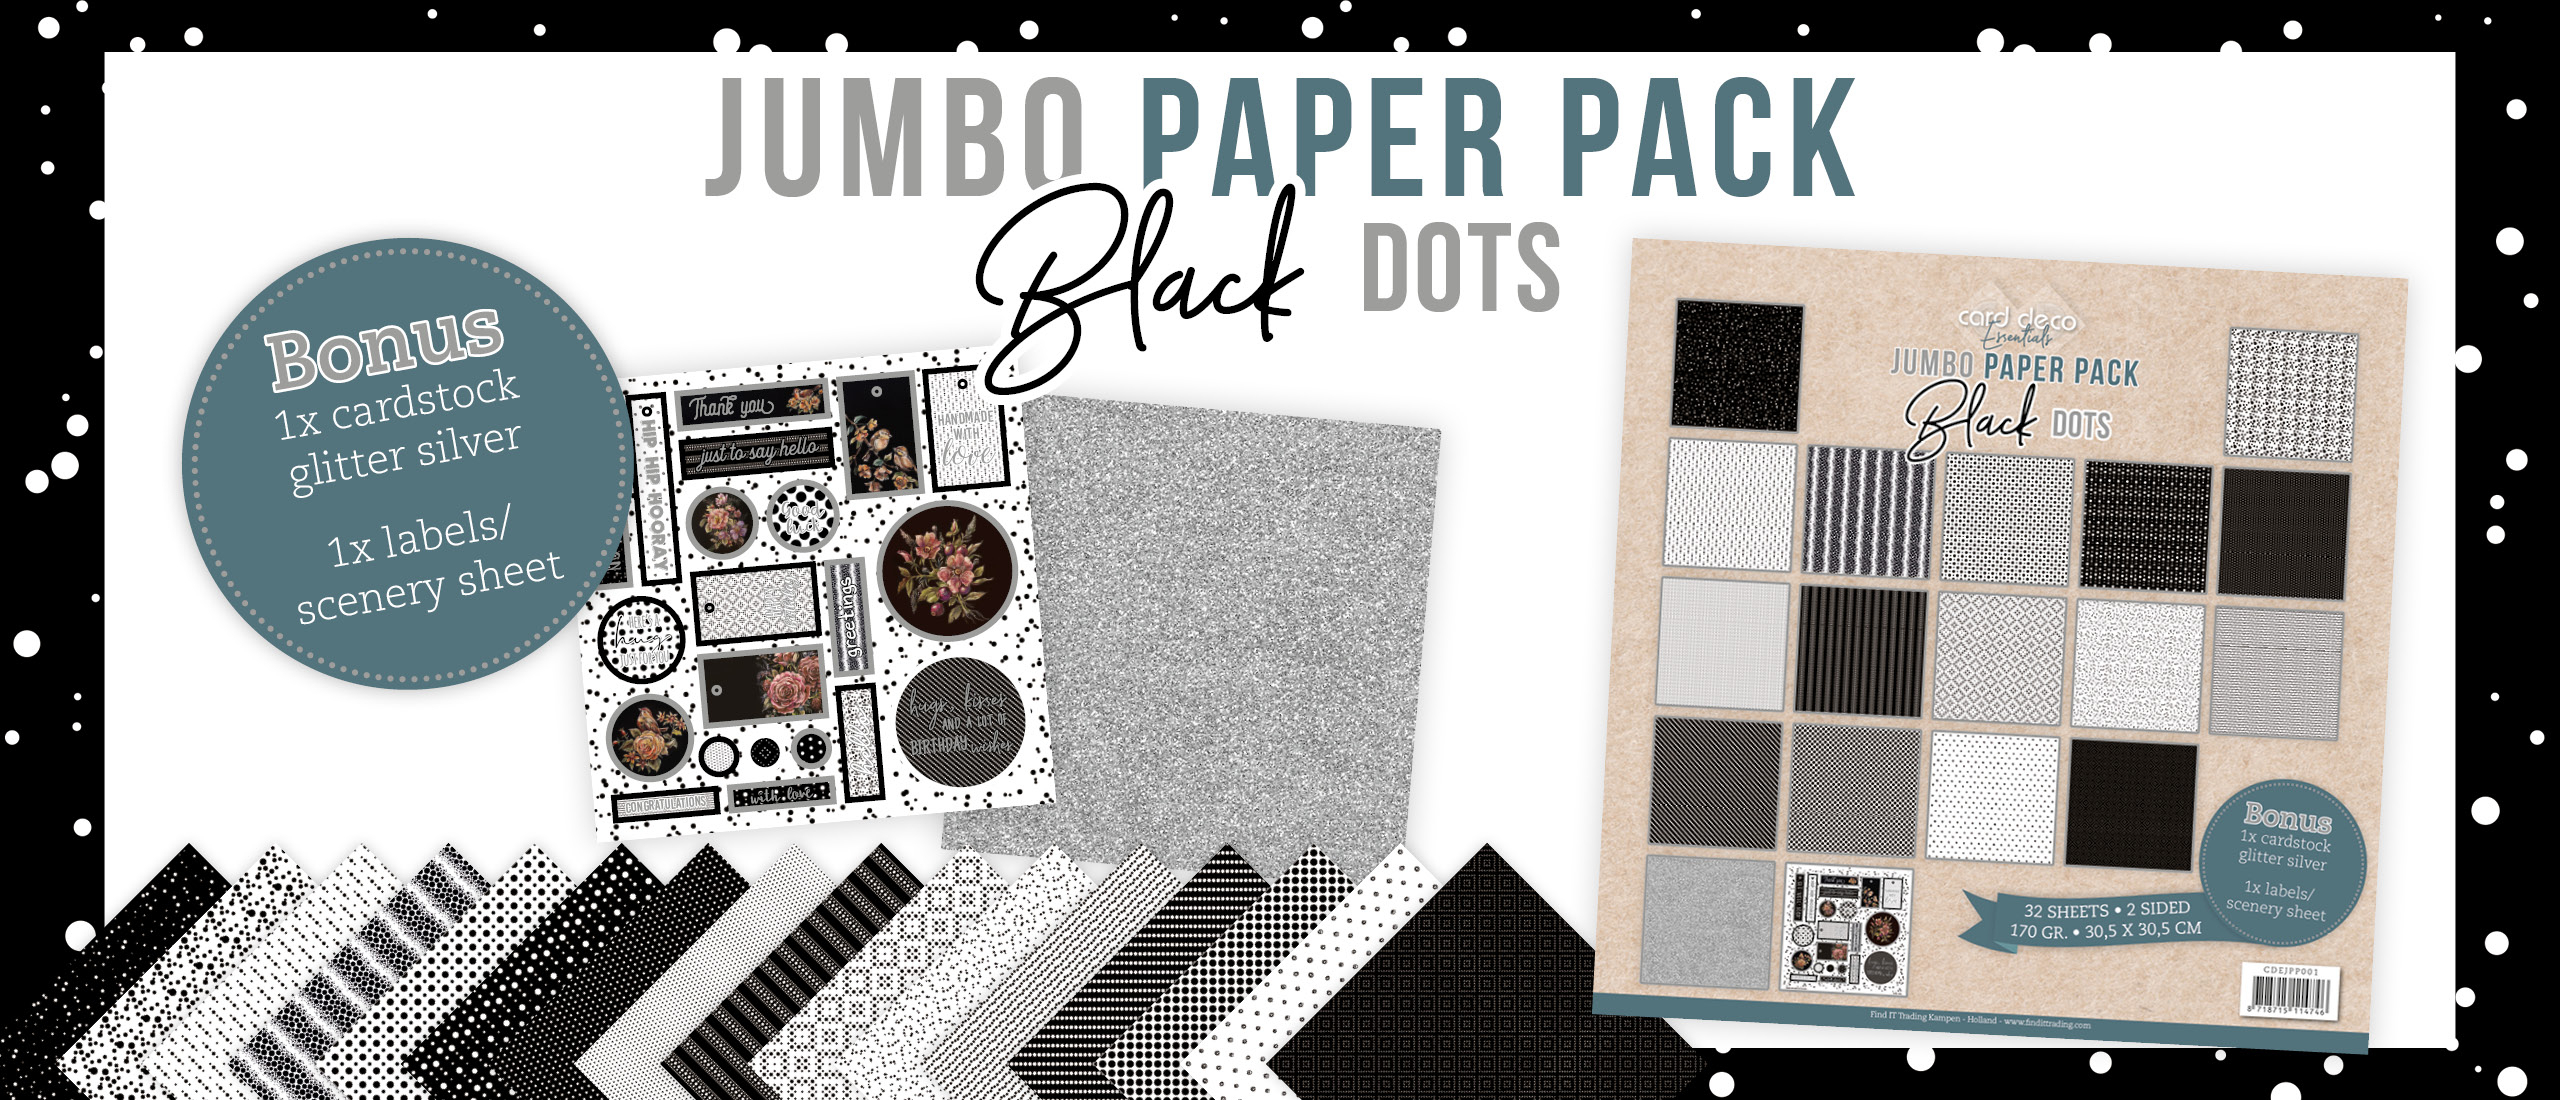 Card Deco Essentials - Jumbo Paperpack Black Dots  (CDEJPP001)